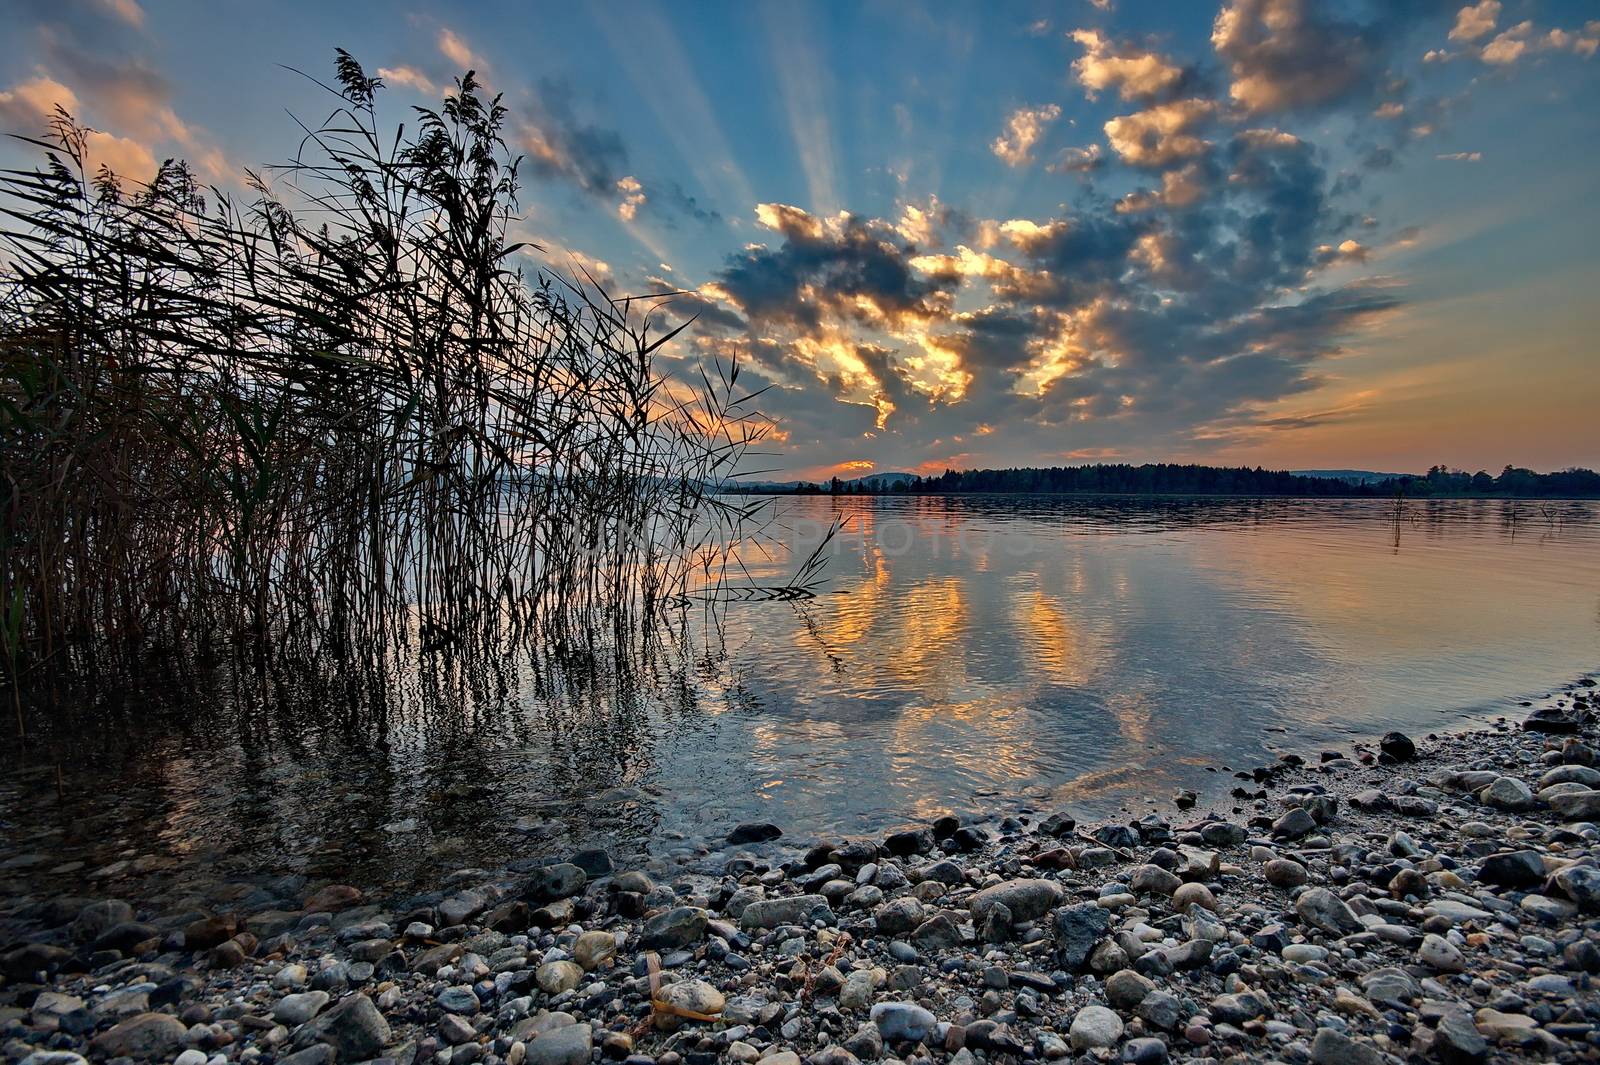 Sunset at lake Chiemsee in Germany